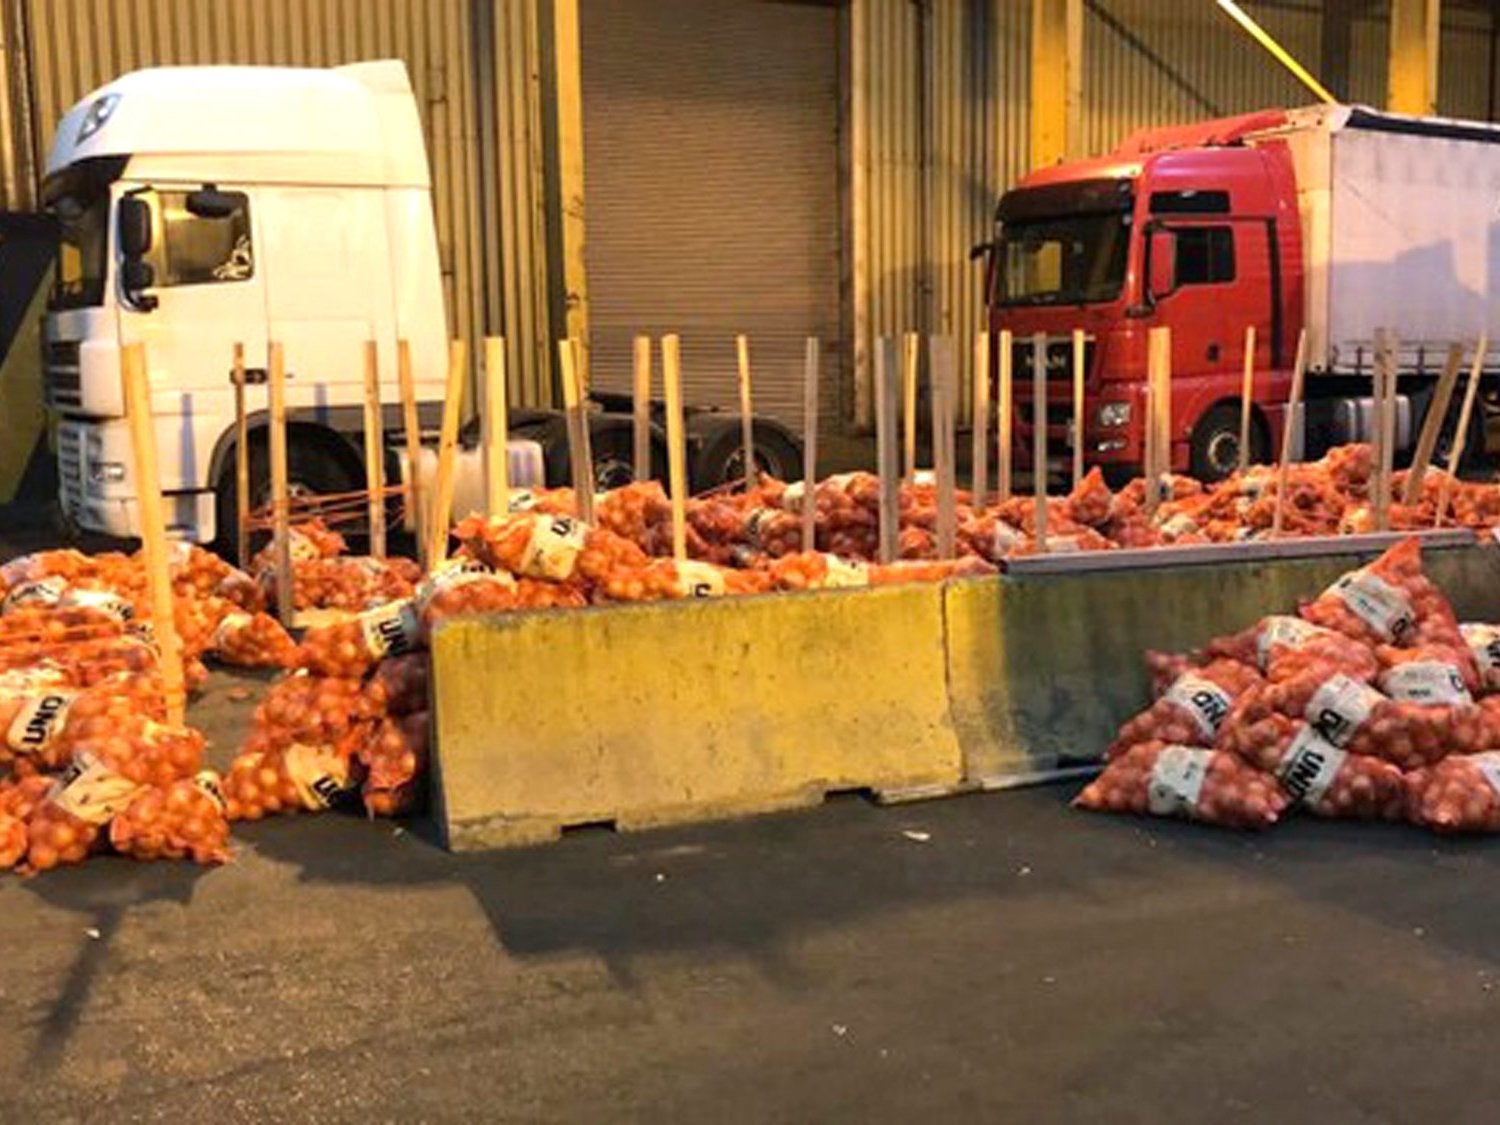 The drugs were found in a lorry load of vegetables (File photo)